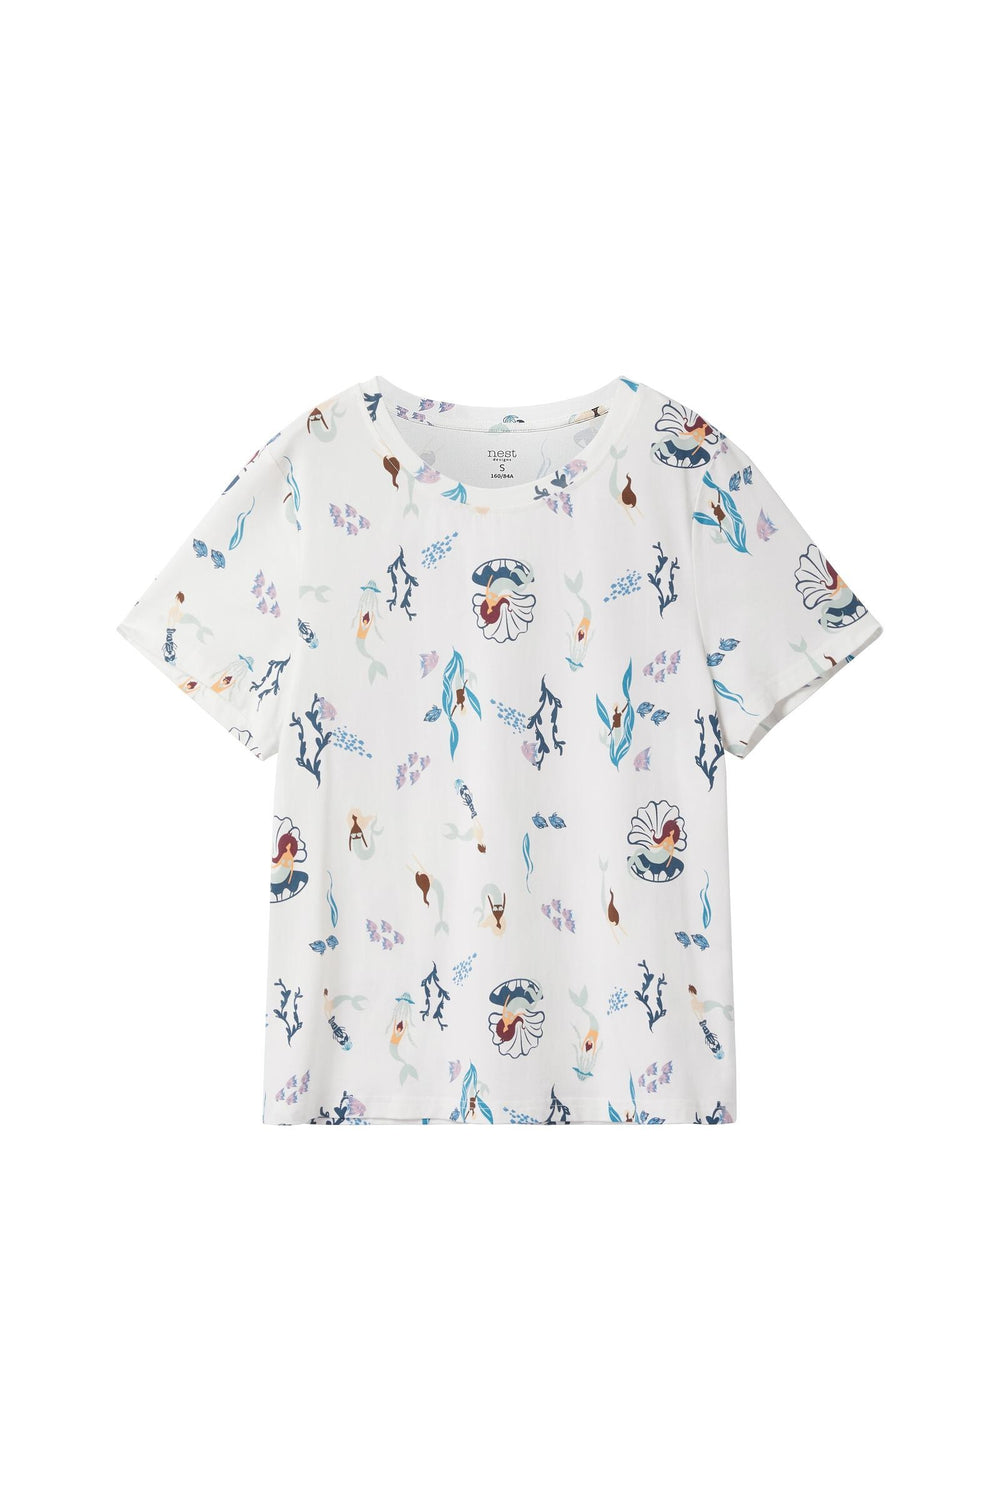 Short Sleeve Shirt featuring the  Splish Splash takes to the deep sea and swim amongst mermaids, fish, and coral. This undersea print offers a glimpse into the fantastic life under the surface, featuring curvy lines that mirror the movement of water.